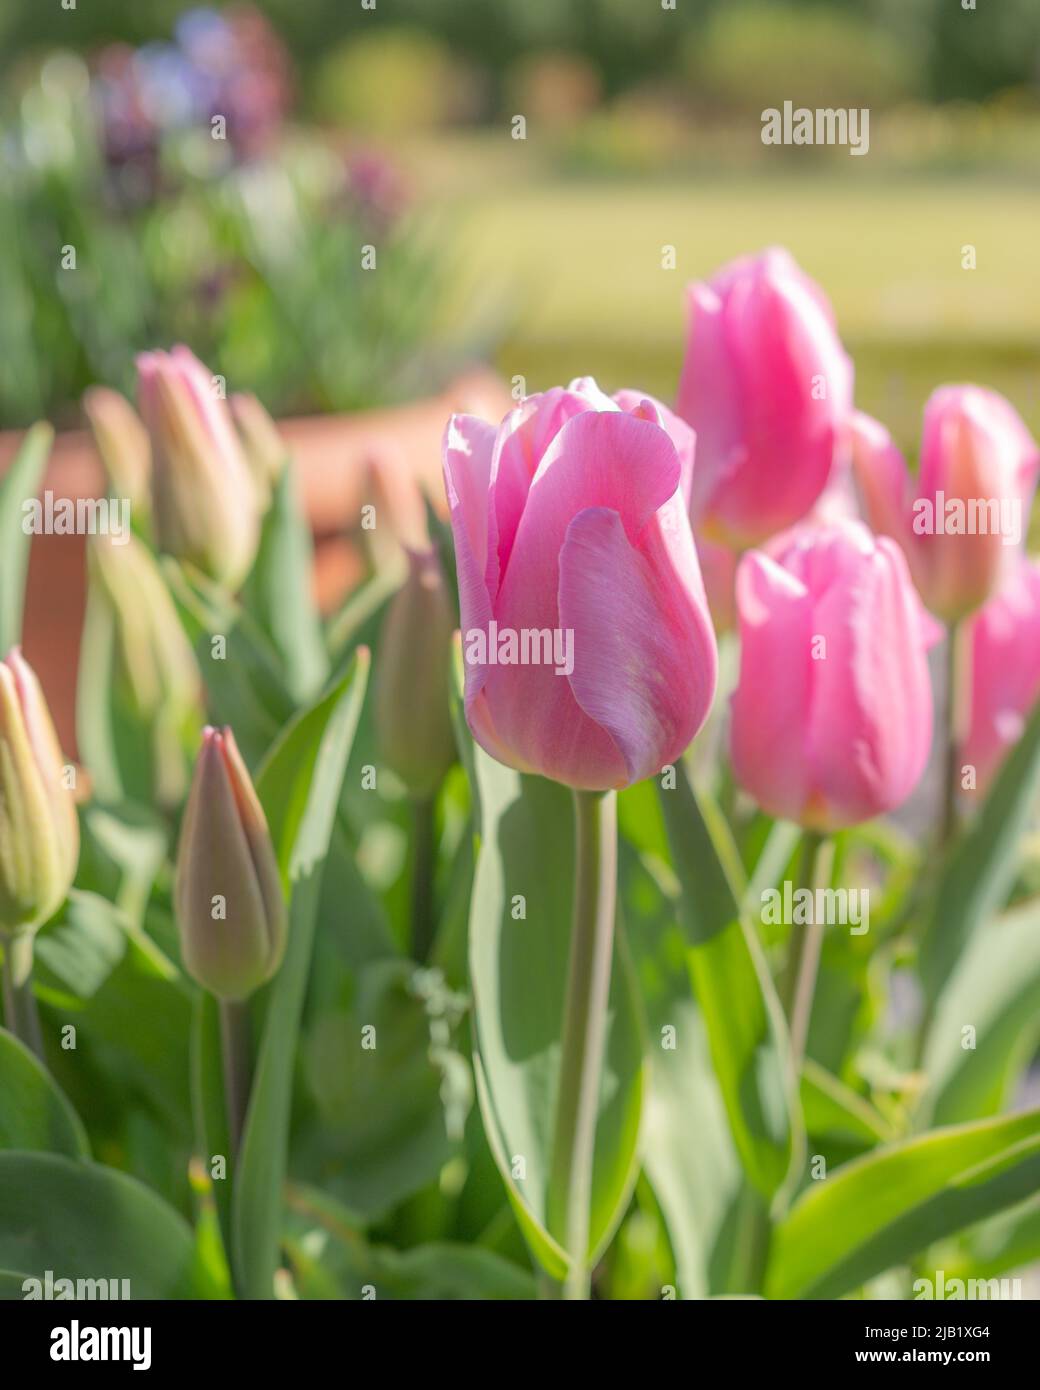 Pink Tulips in a spring garden. Stock Photo